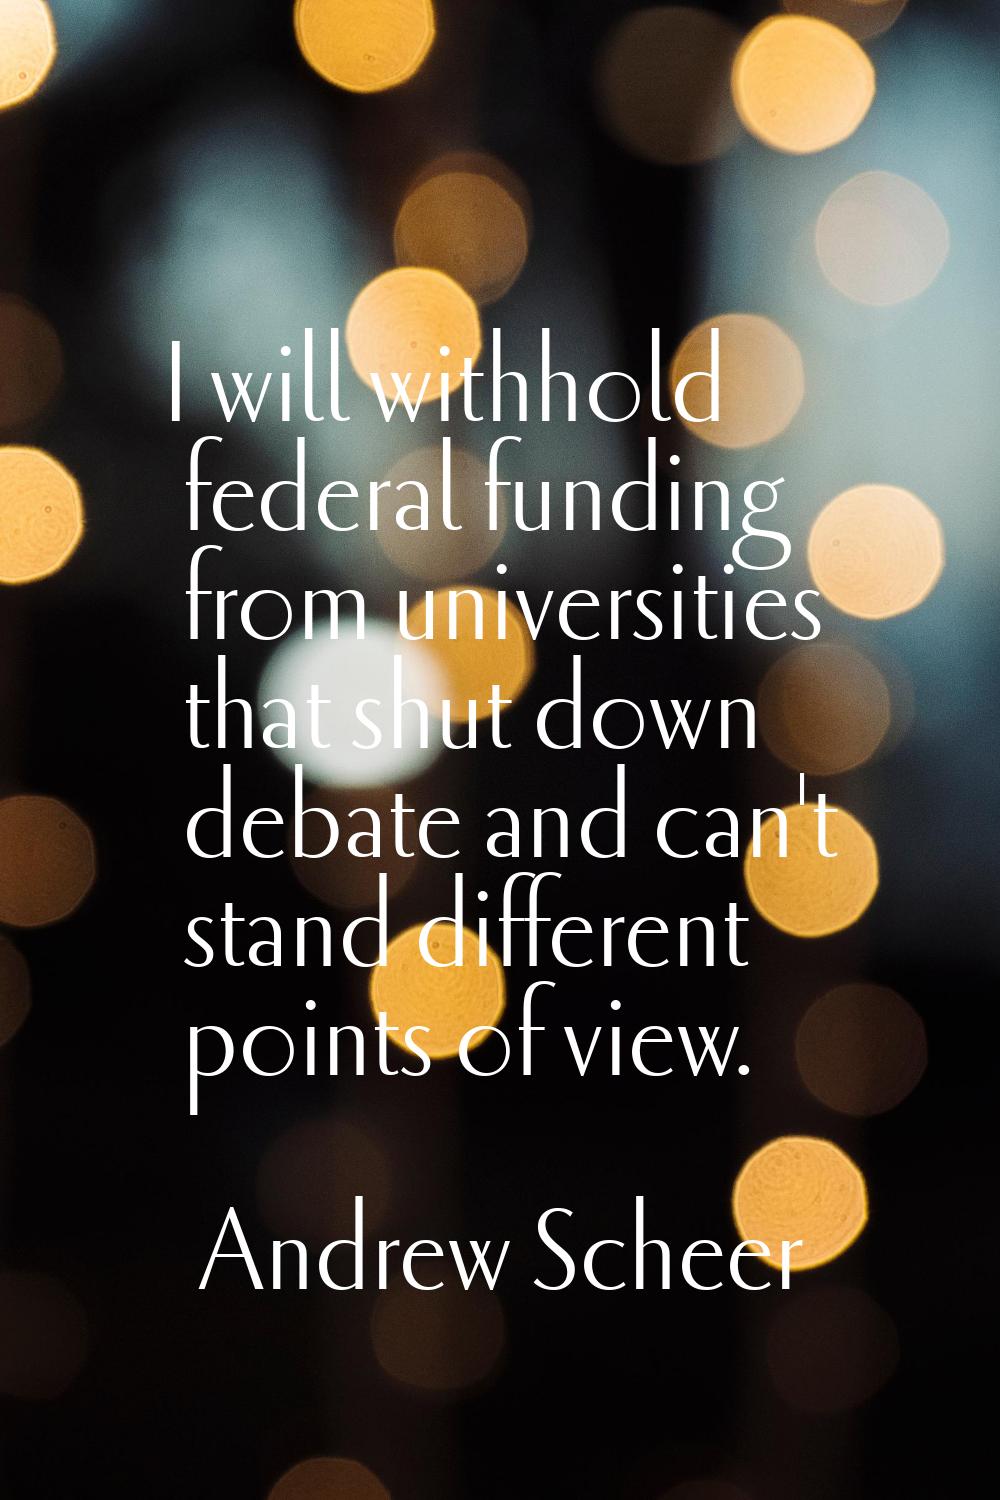 I will withhold federal funding from universities that shut down debate and can't stand different p